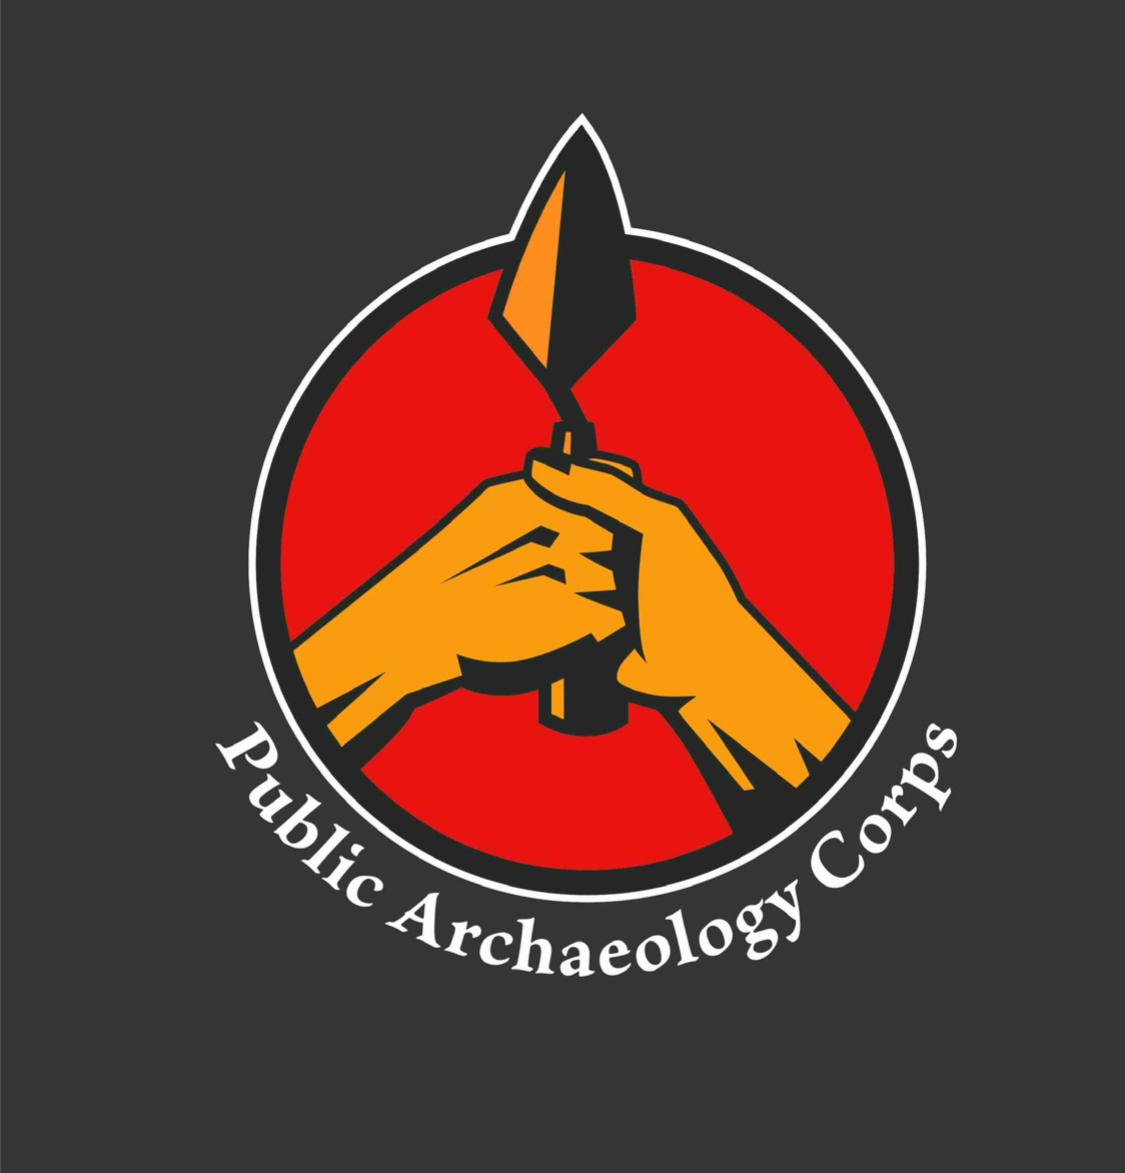 Public Archaeology Corps